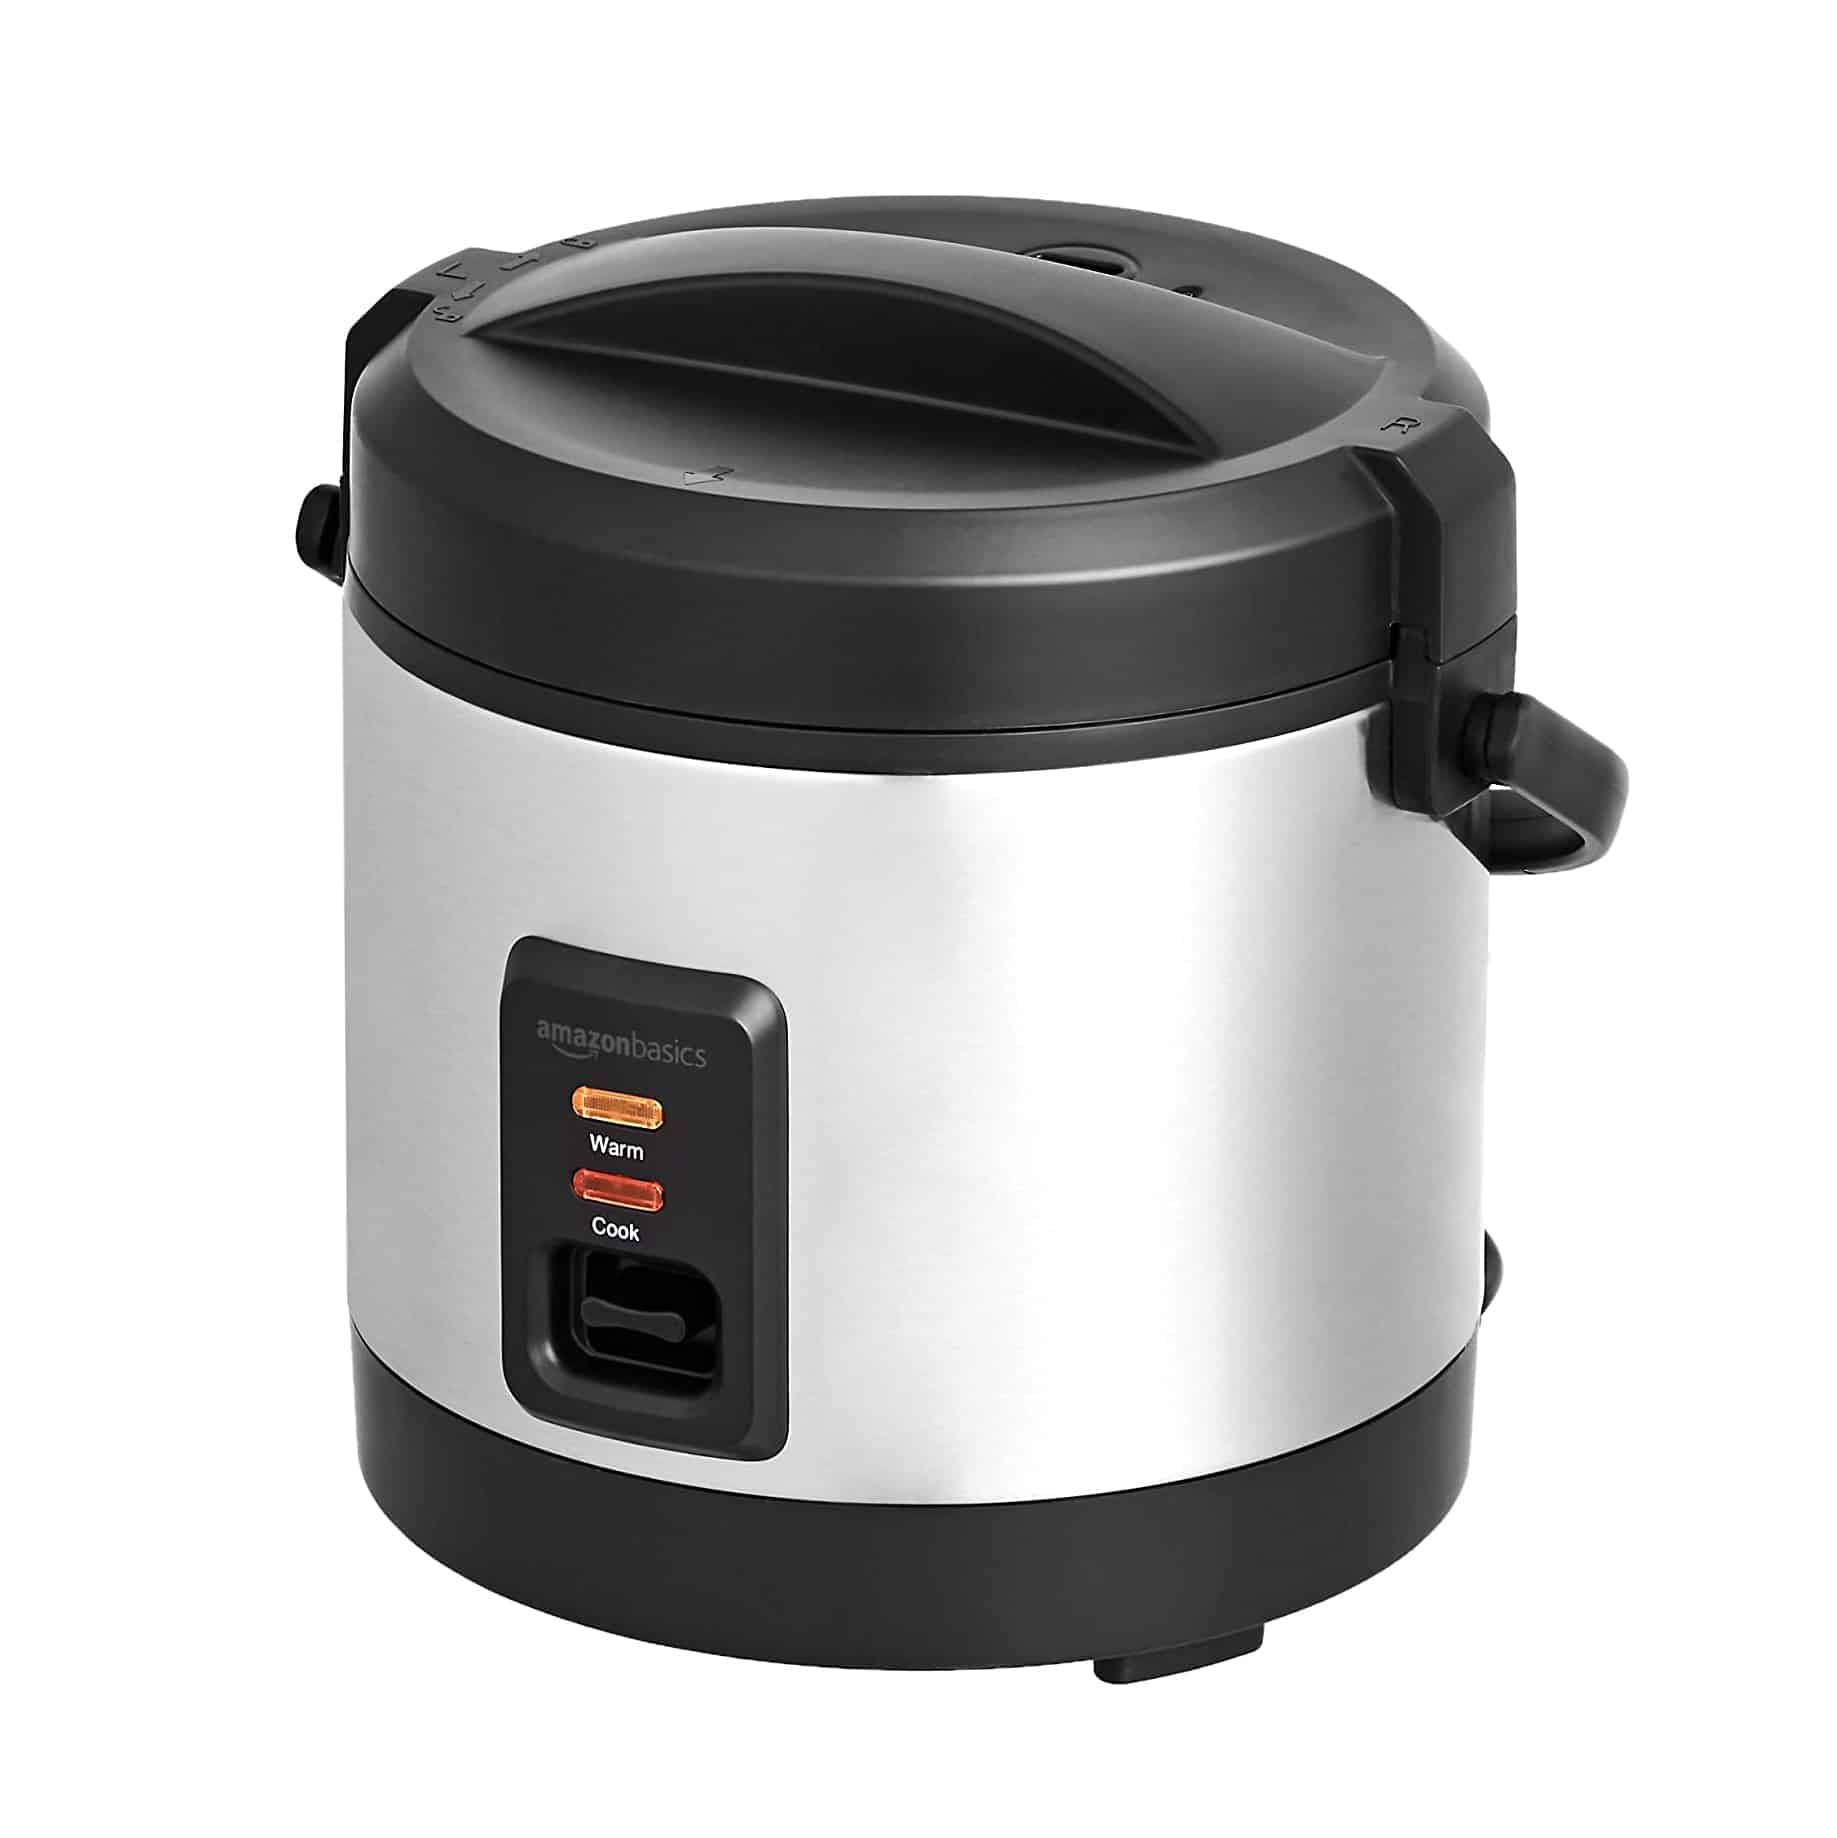 Top 10 Best Mini Rice Cookers in 2022 Reviews Buyer's Guide